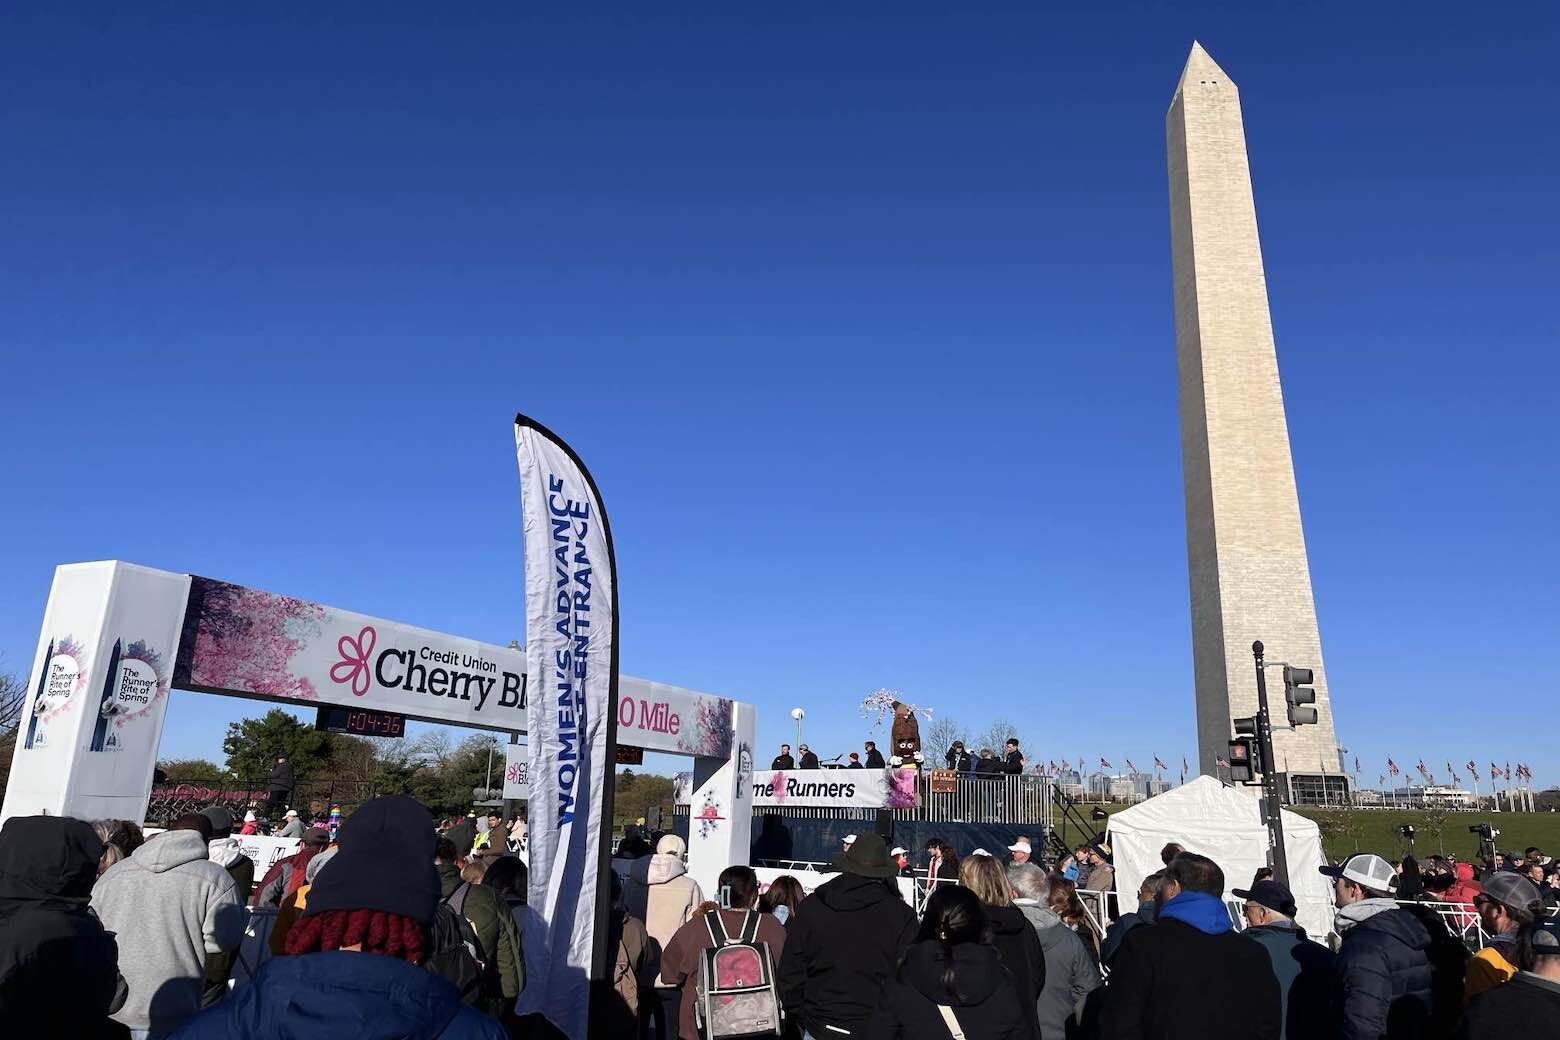 PHOTOS: Runners take on the 51st annual Cherry Blossom 10 Mile Race in DC - WTOP News